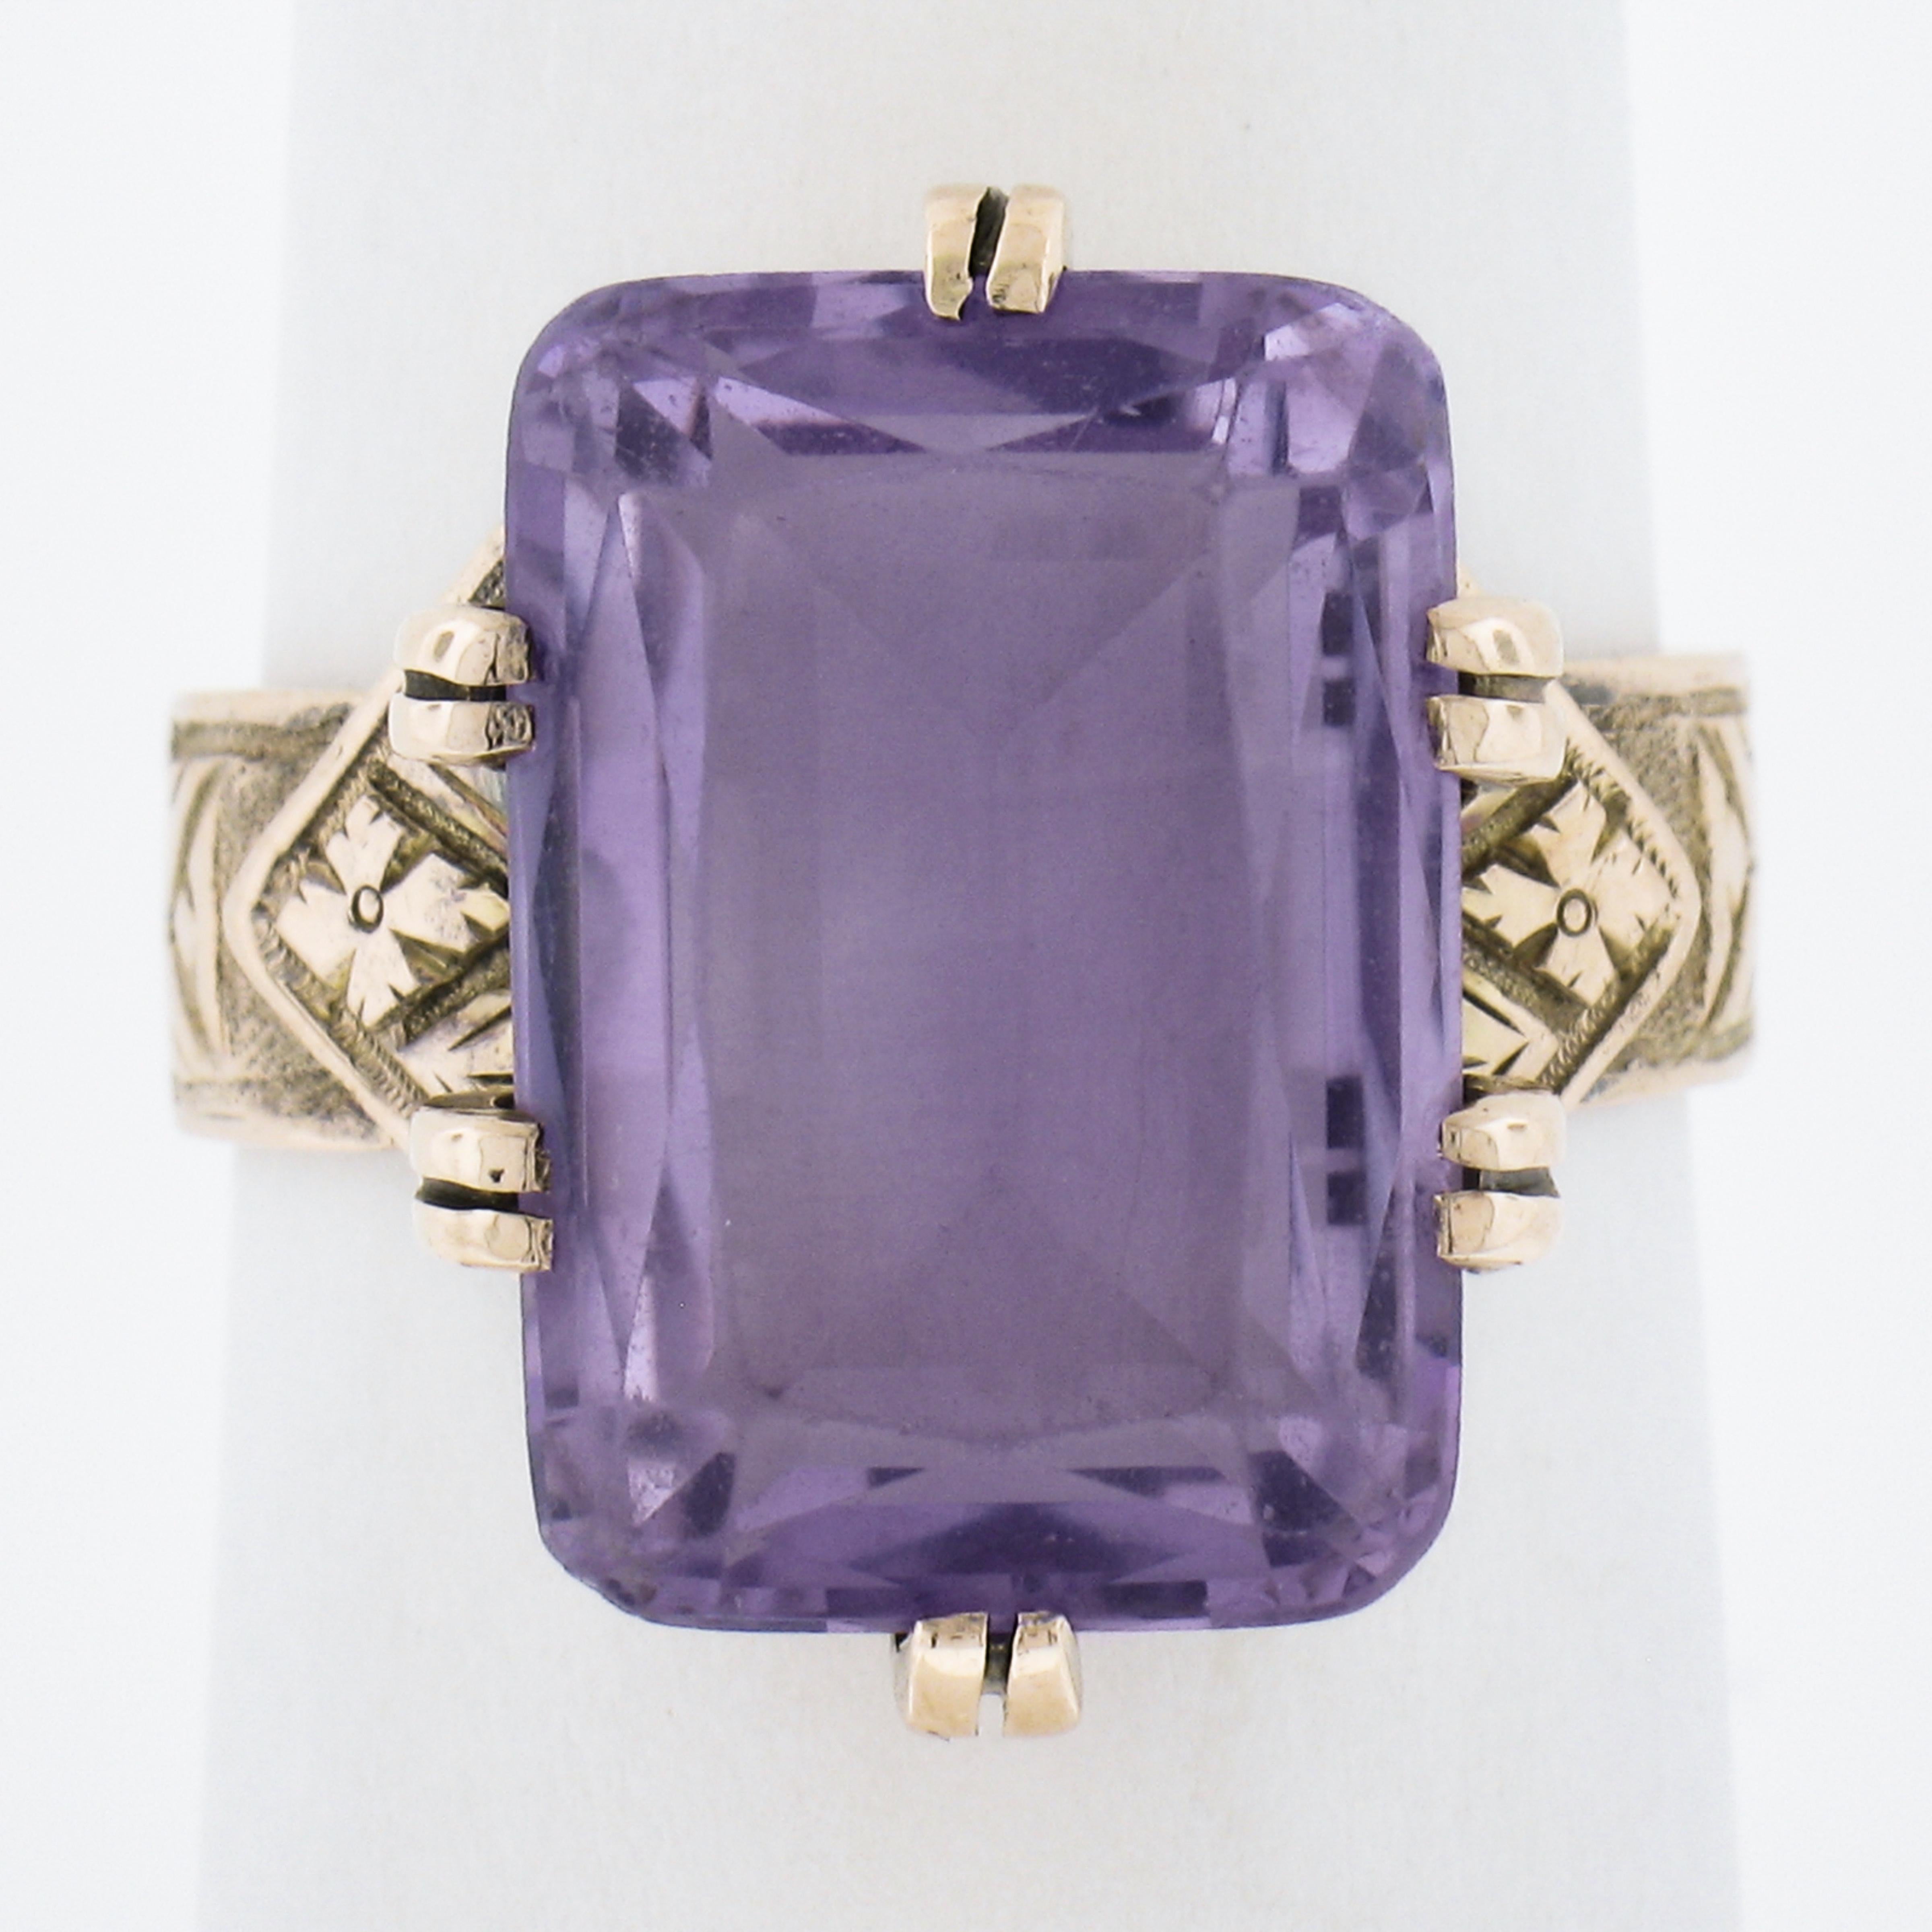 --Stone(s):--
(1) Natural Genuine Amethyst - Rectangular Cut - 6 Dual Prong Set - Medium Purple Color - 15.6x11mm (approx.)
Total Carat Weight:	7.50 (approx.)

Material: Solid 10K Rosy Yellow Gold
Weight: 6.44 Grams
Ring Size: 7.0 (Fitted on a